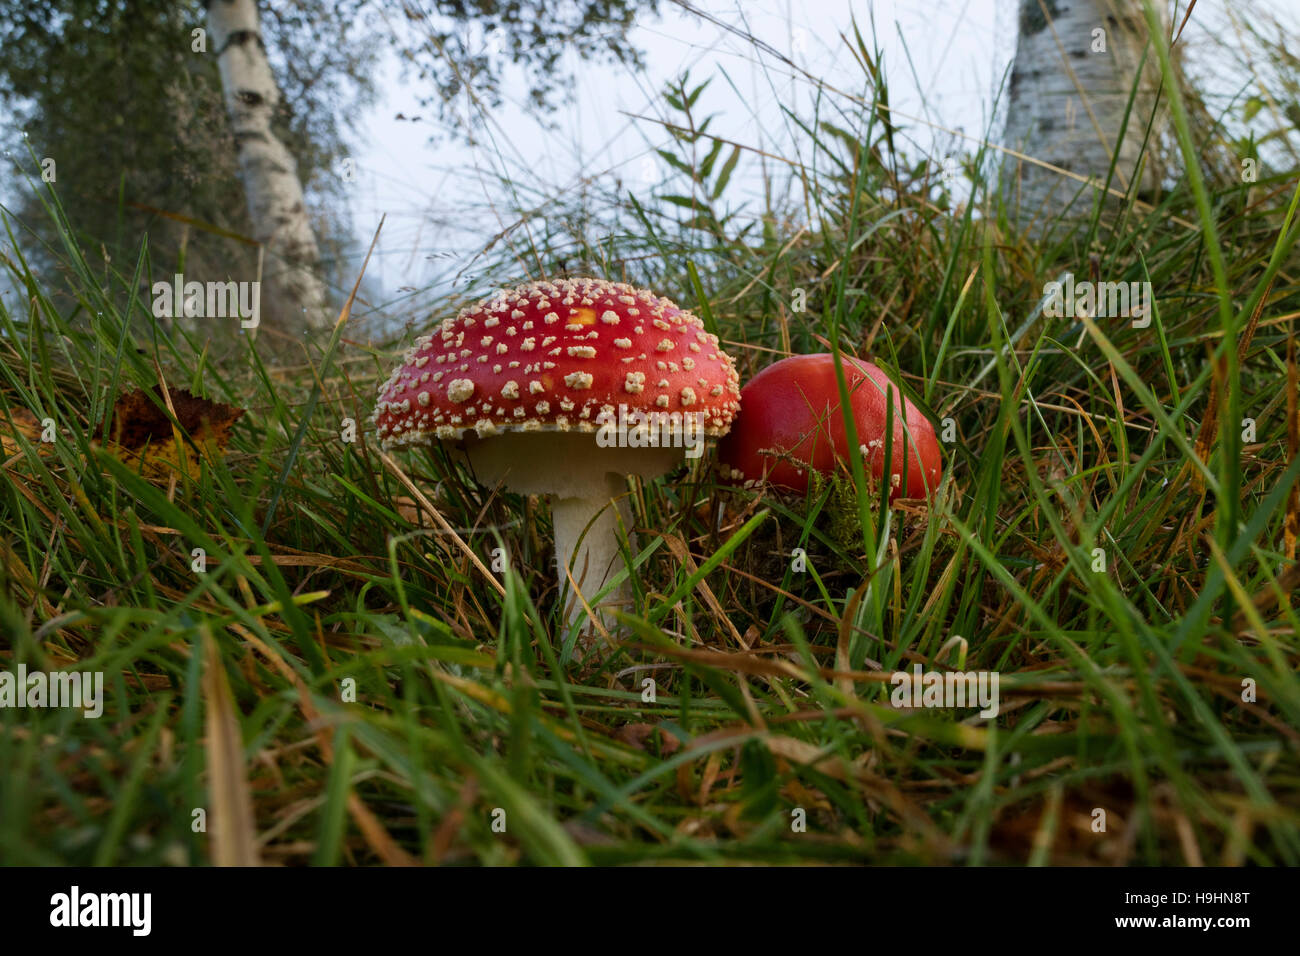 Pair of Amanita mushrooms in the forest Stock Photo